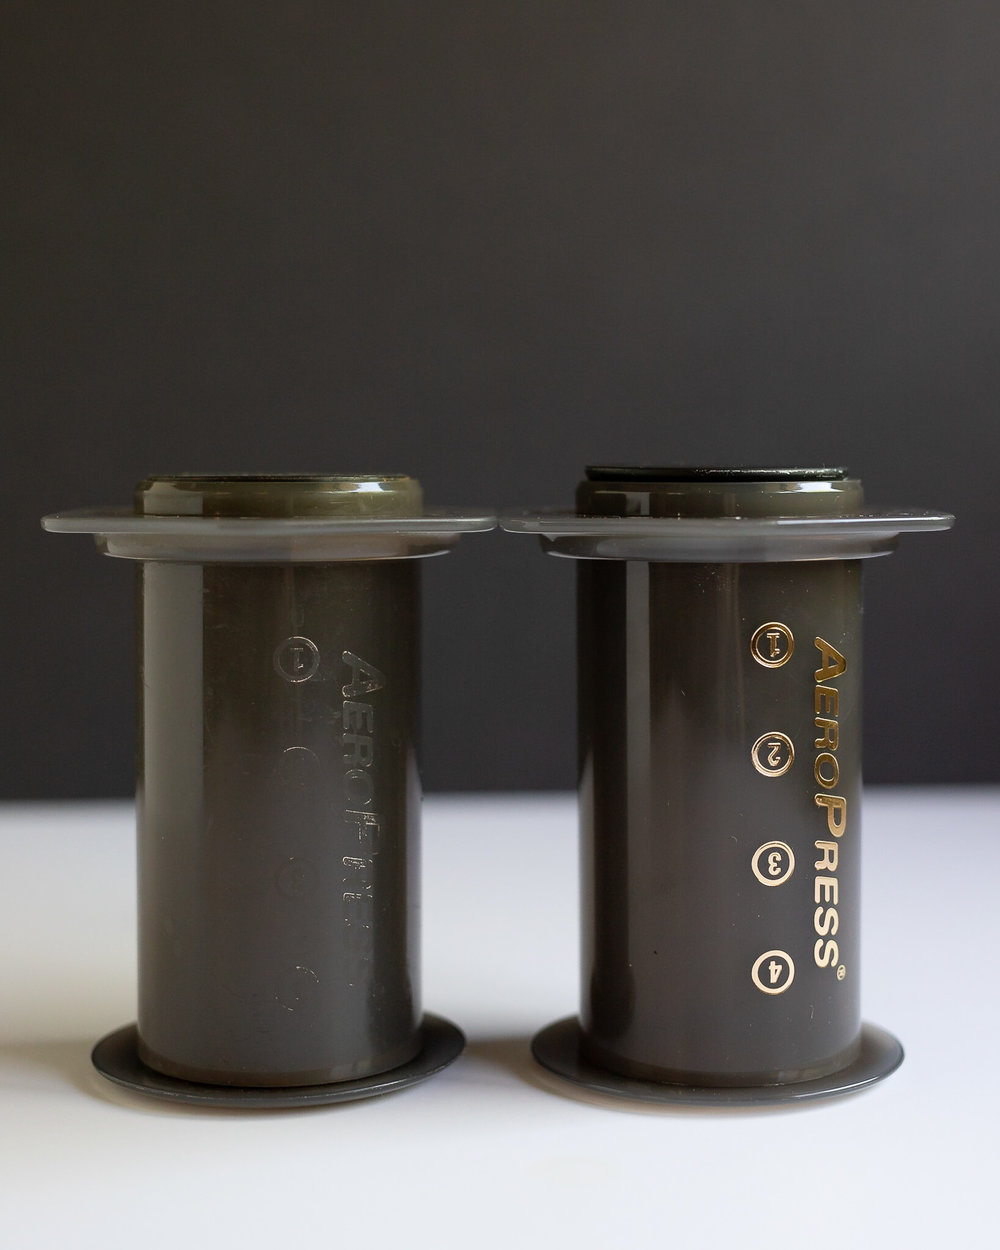 Off-Brand gasket (left) compared to brand new Aerobie Aeropress gasket (right)